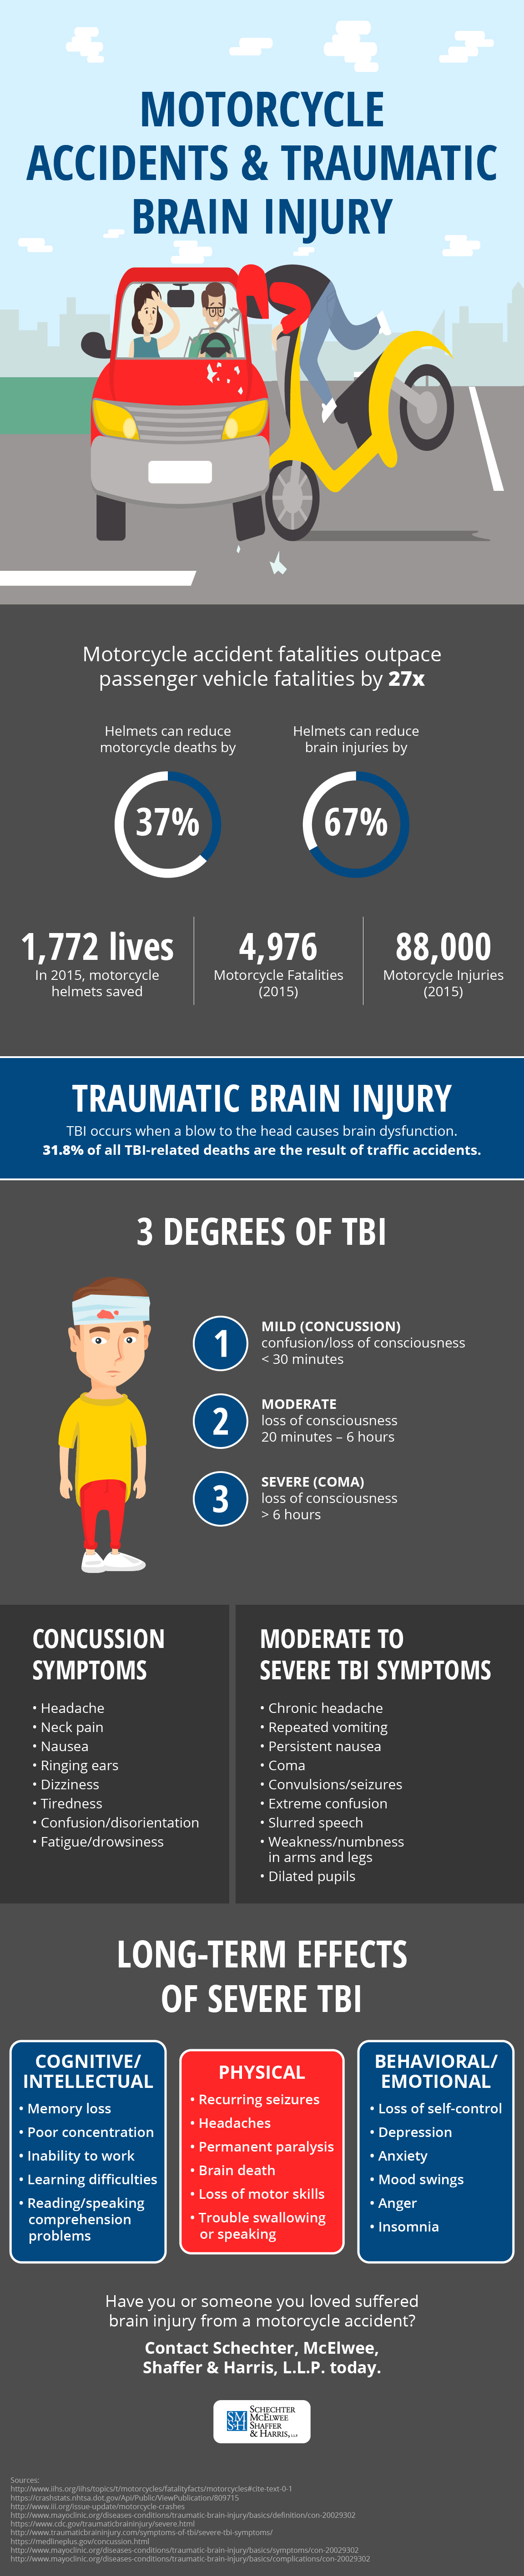 Motorcycle Accidents and Traumatic Brain Injury Infographic